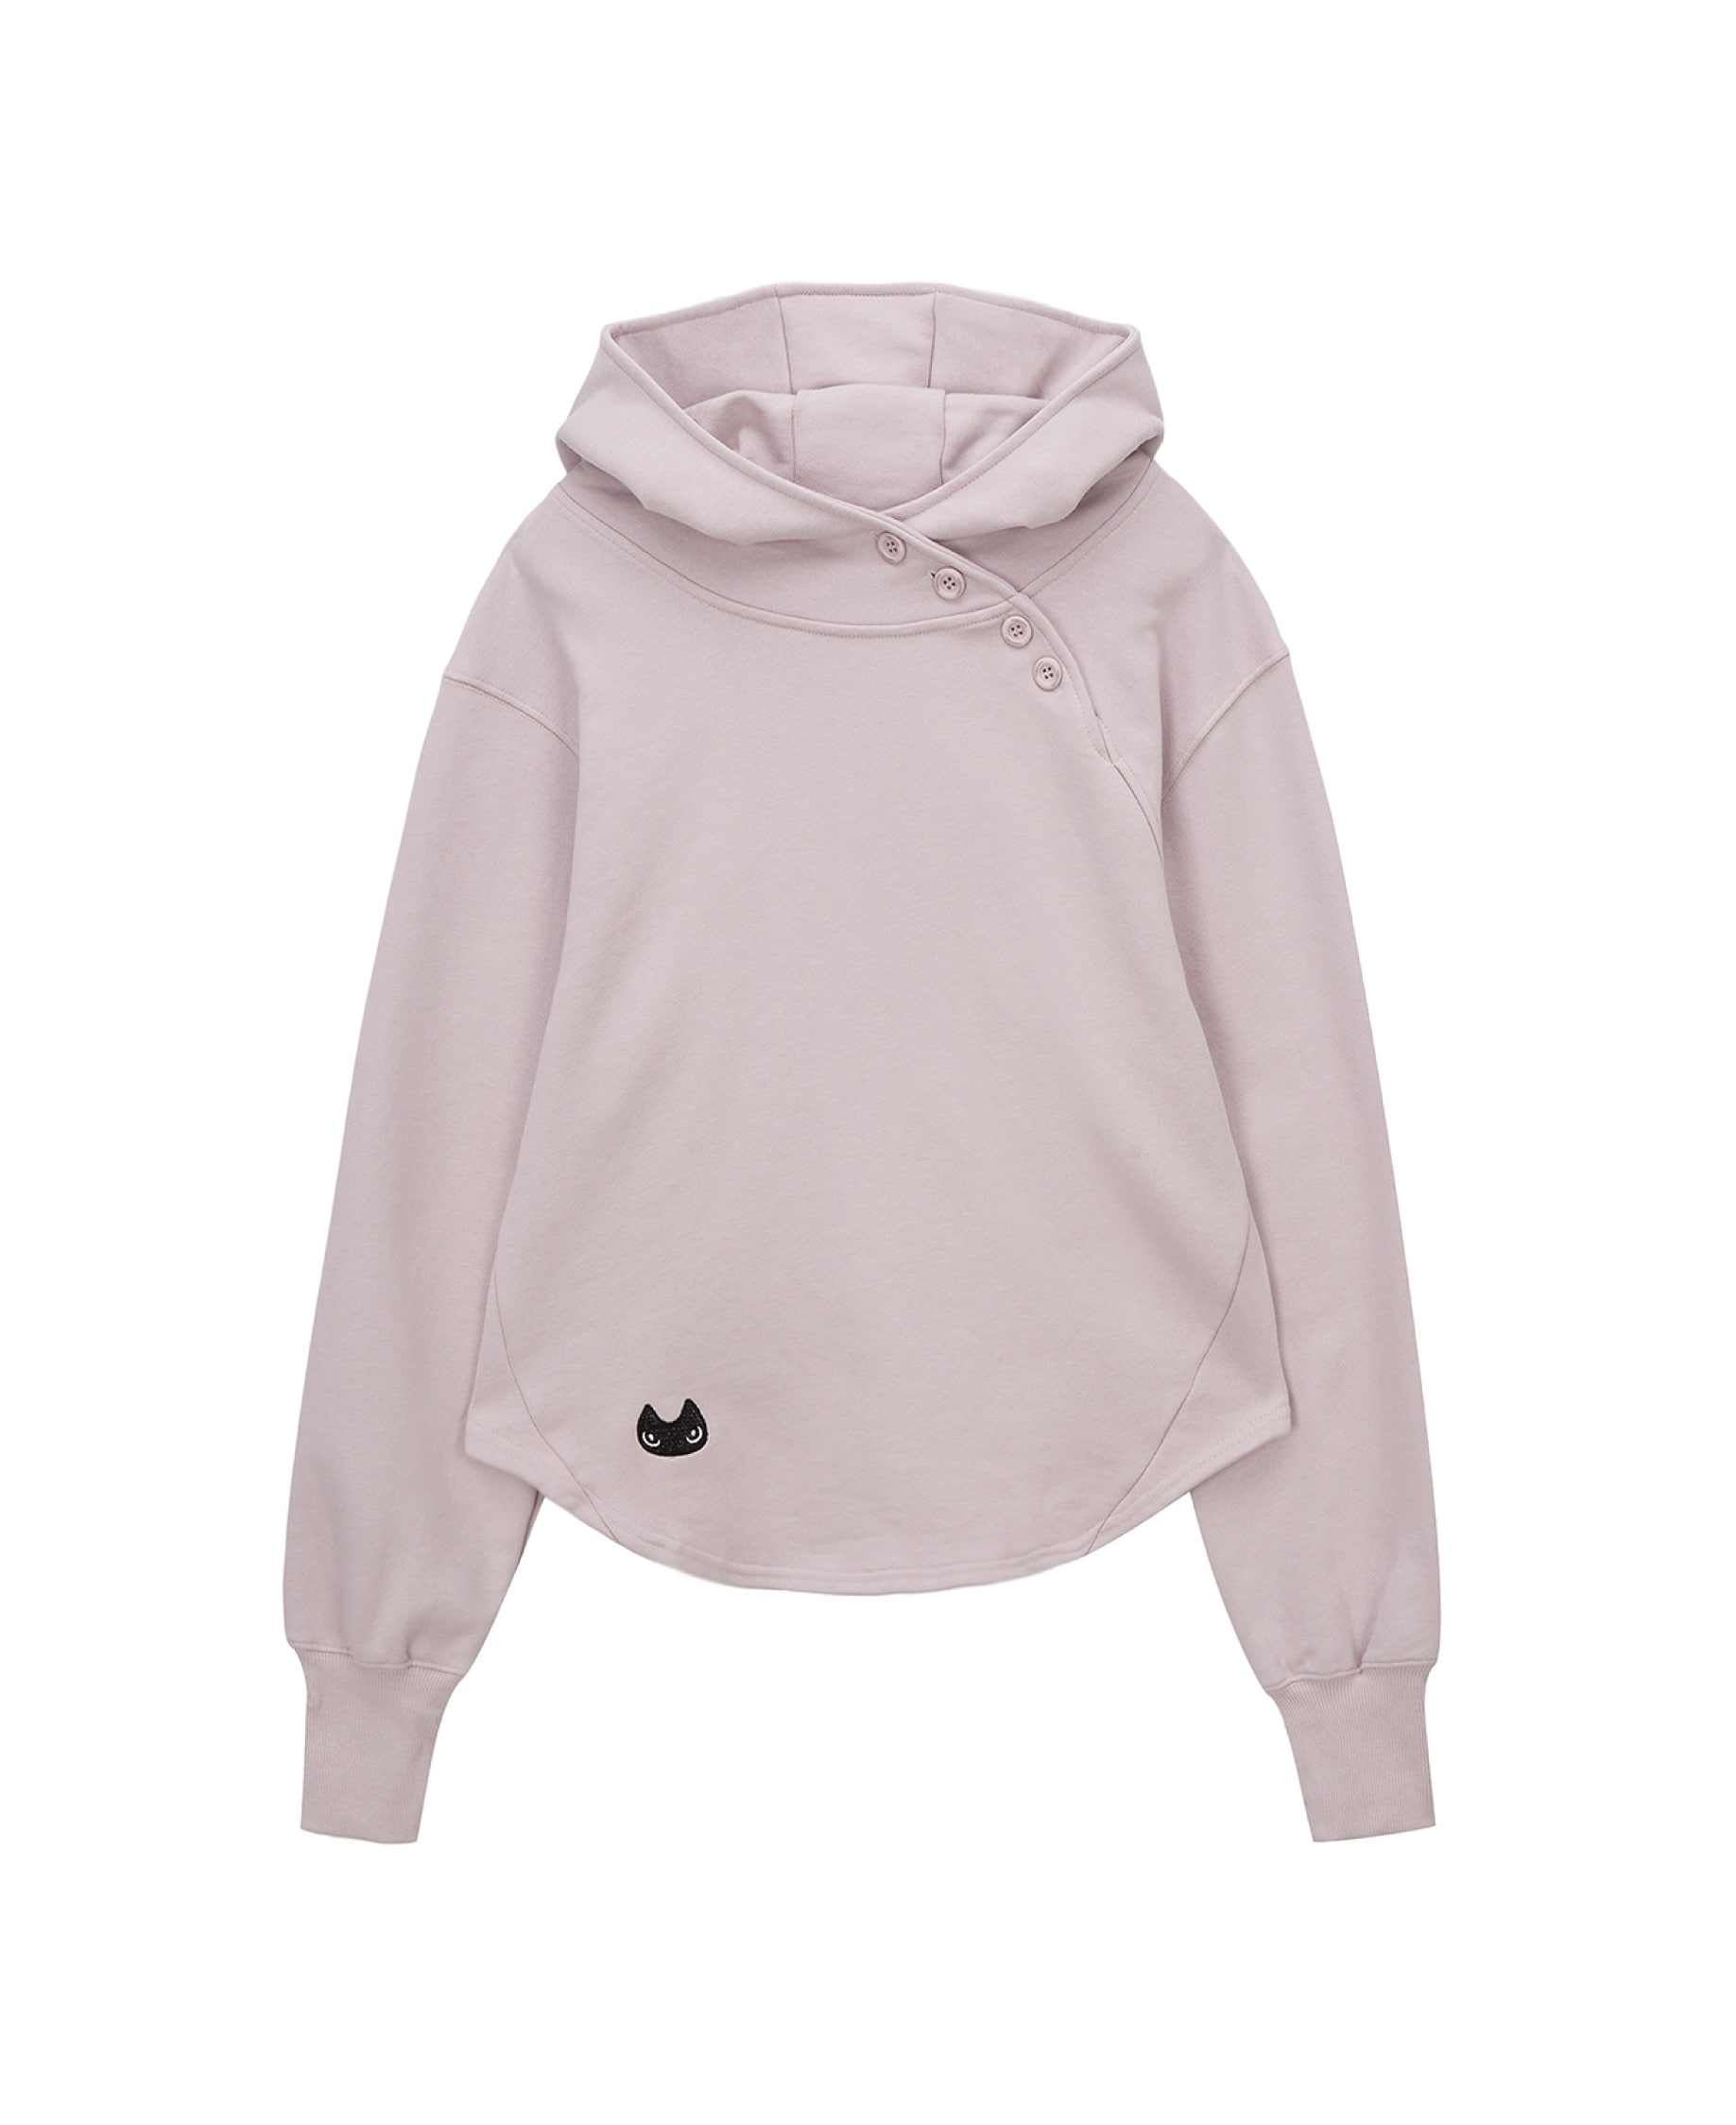 Hugging Button-up hoodie (pink)